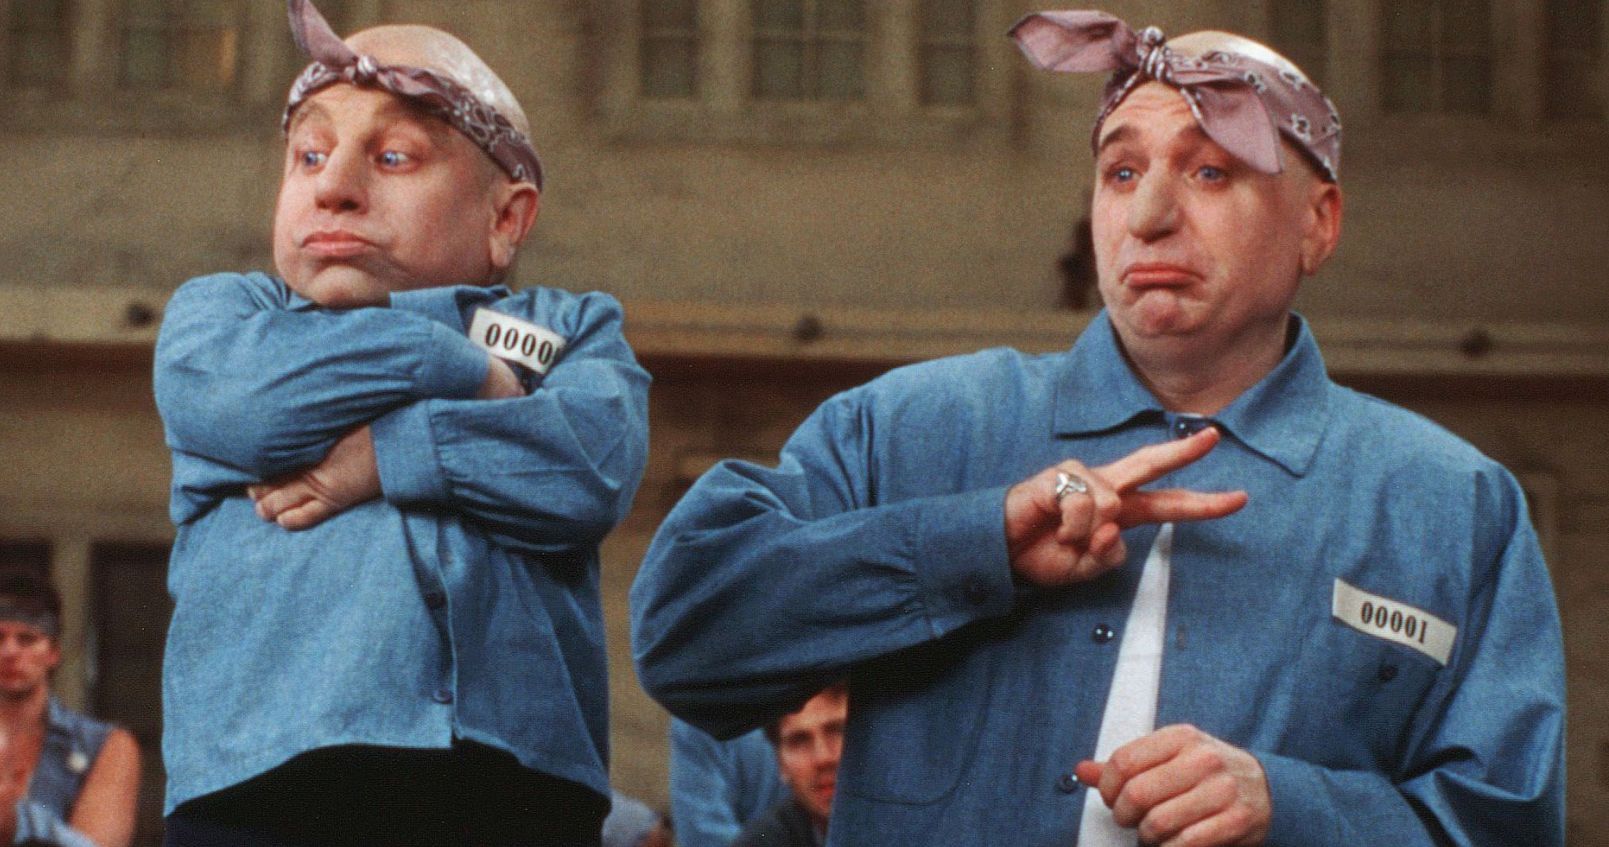 Austin Powers 4 Probably Won't Happen Without Verne Troyer as Mini-Me